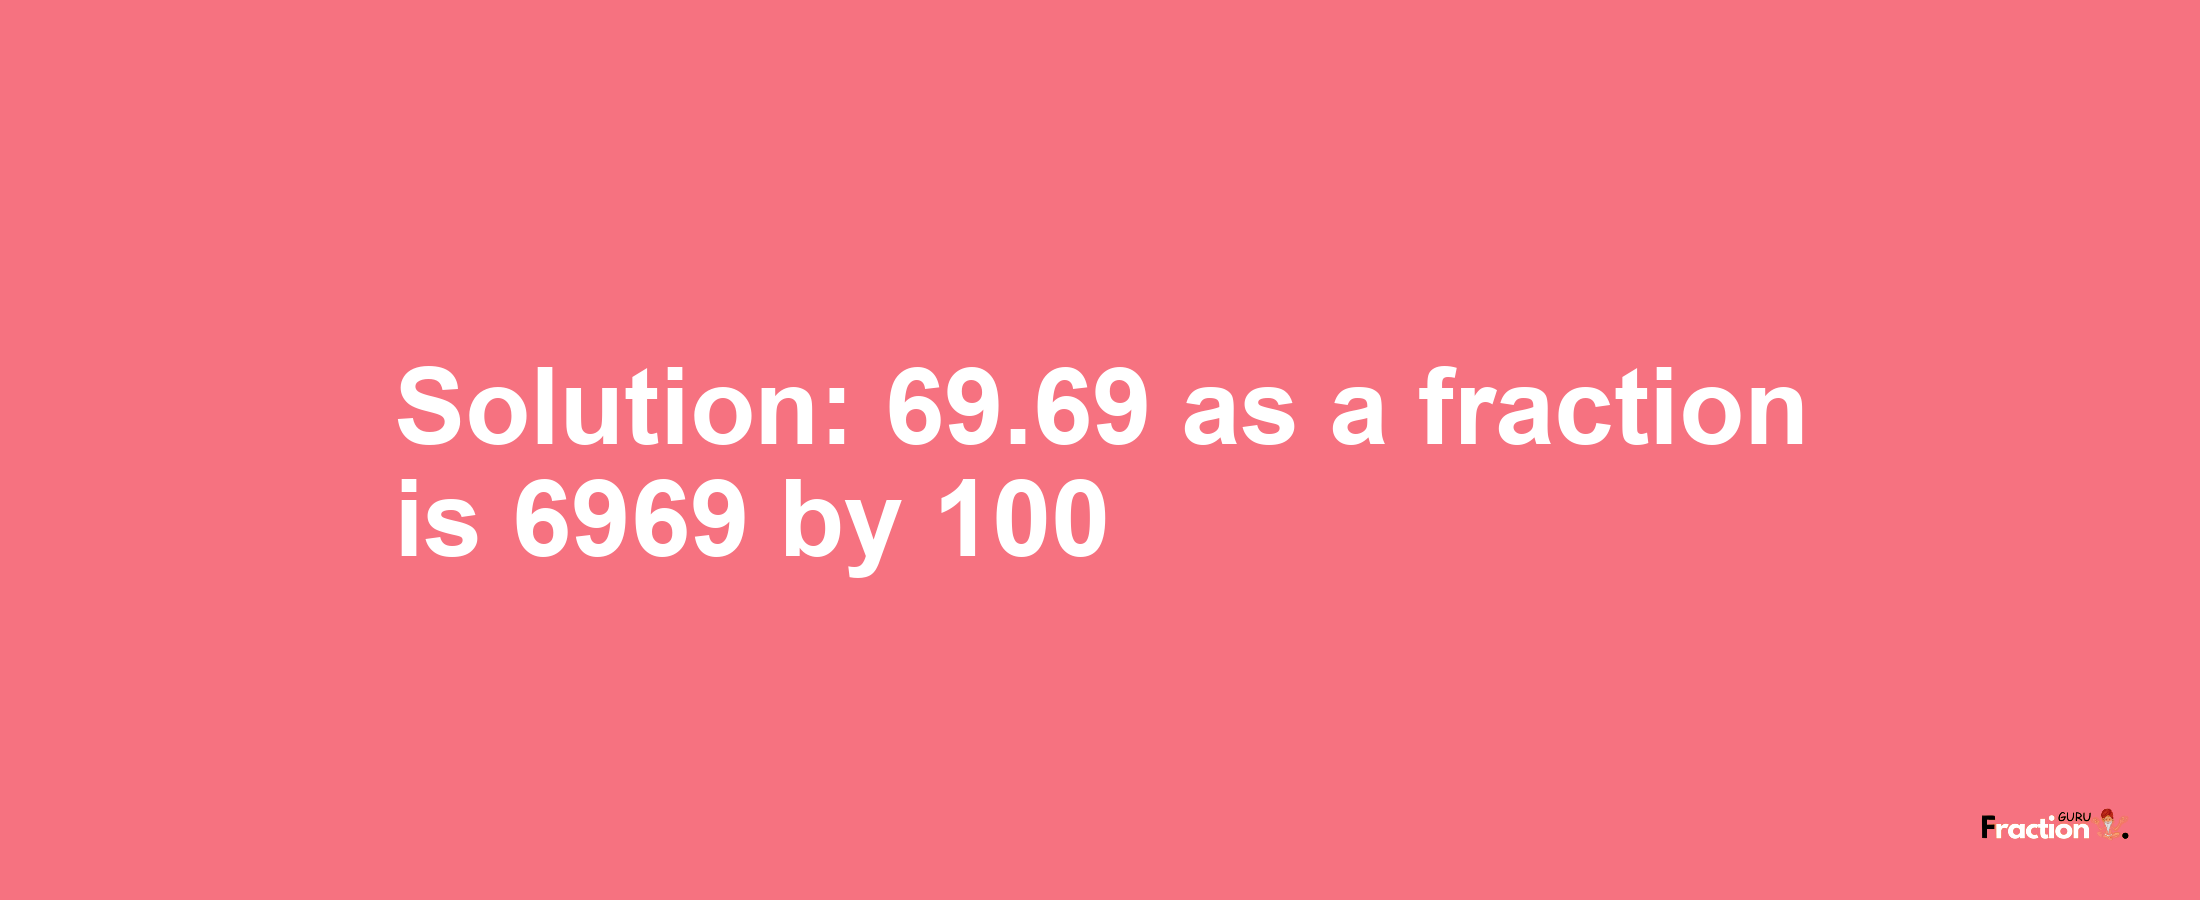 Solution:69.69 as a fraction is 6969/100